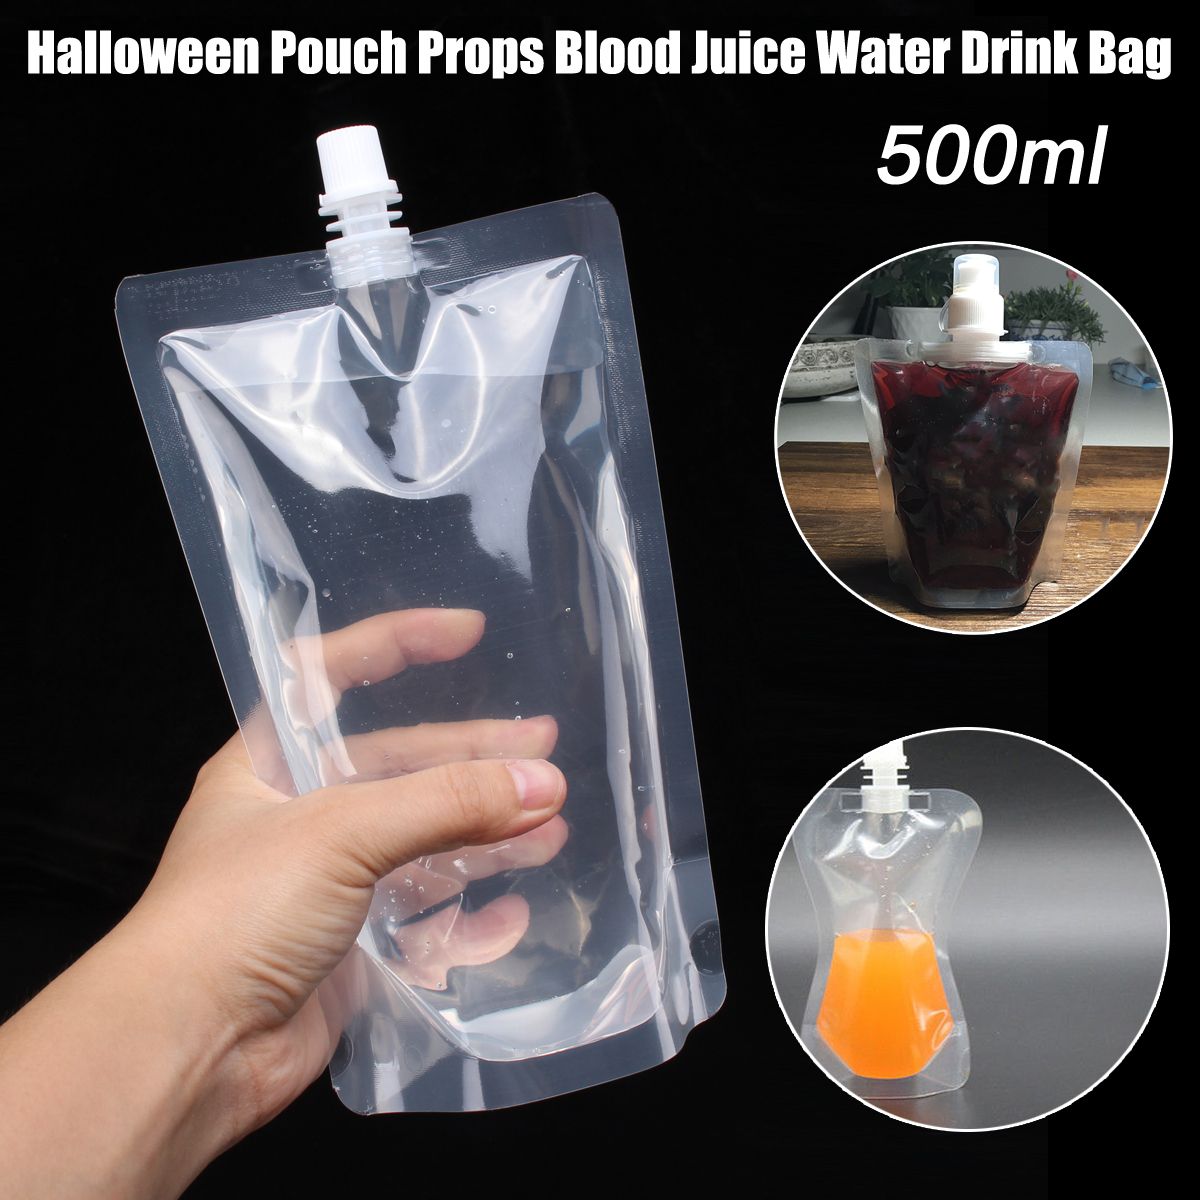 500ml-Halloween-Pouch-Props-Blood-Juice-Water-Drink-Bag-Reusable-Cosplay-Party-Use-1351841